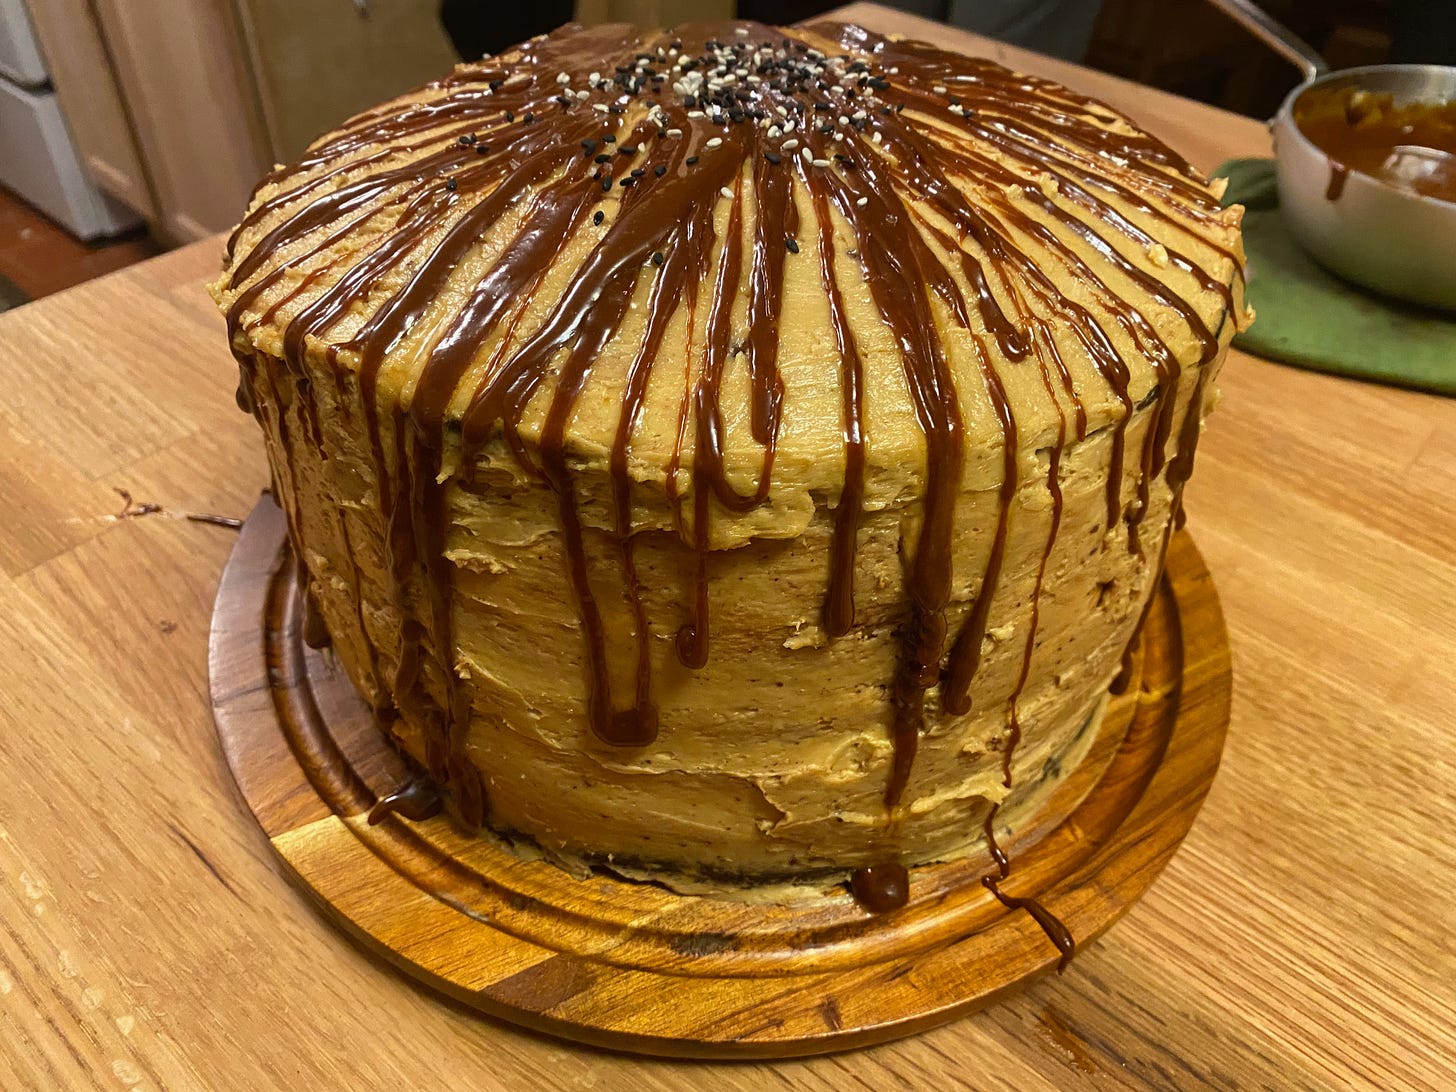 A tall layer cake sits on a kitchen counter. It’s covered in thick tahini frosting, and uneven drizzles of caramel run down the sides from the top, which is sprinkled with sesame seeds. A small pan of caramel sits on the counter behind the cake.